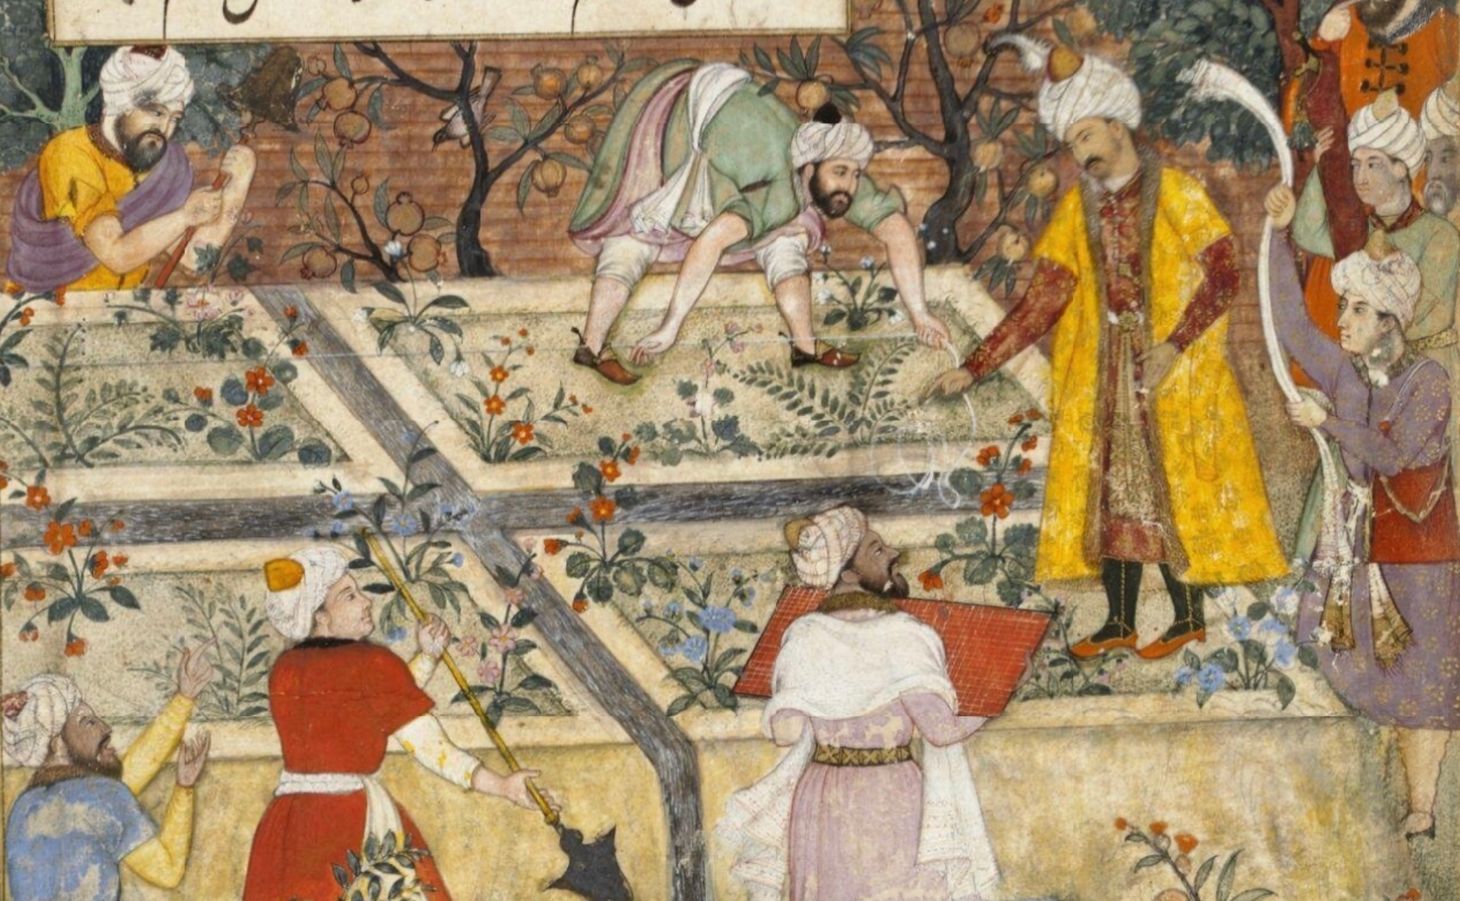 “Marvelously Regular and Geometric Gardens”: Babur and the Founding of the Mughal Empire